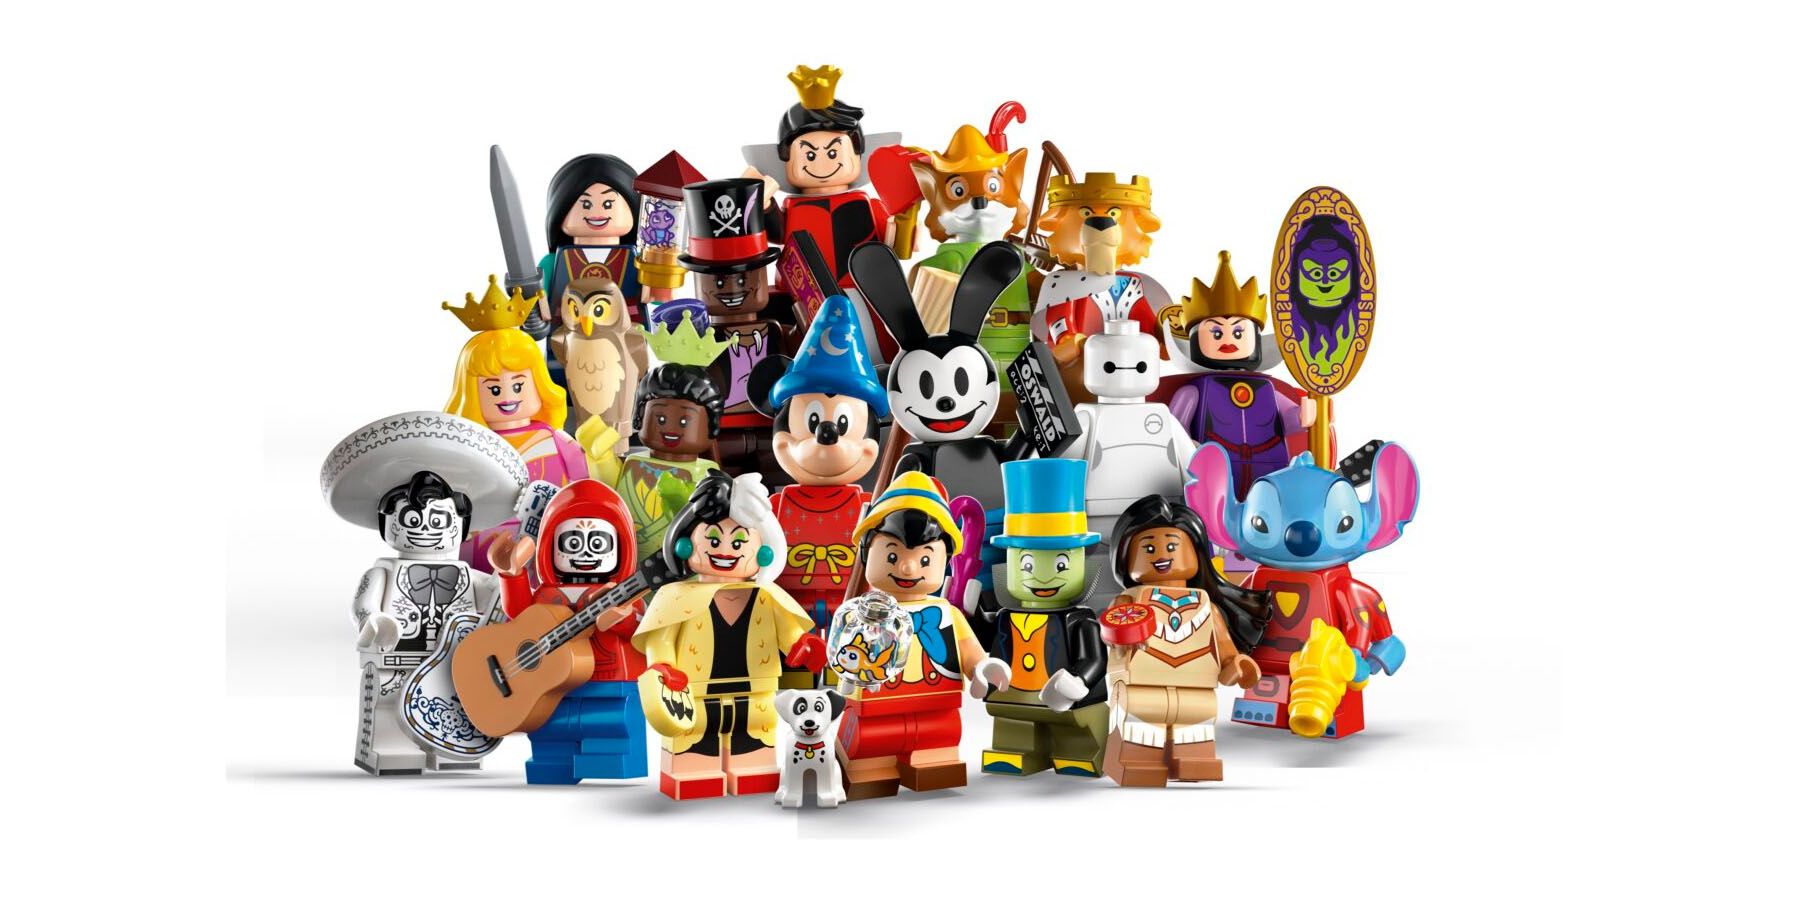 A promotional image of a variety of Disney themed LEGO minifigures against a white background.